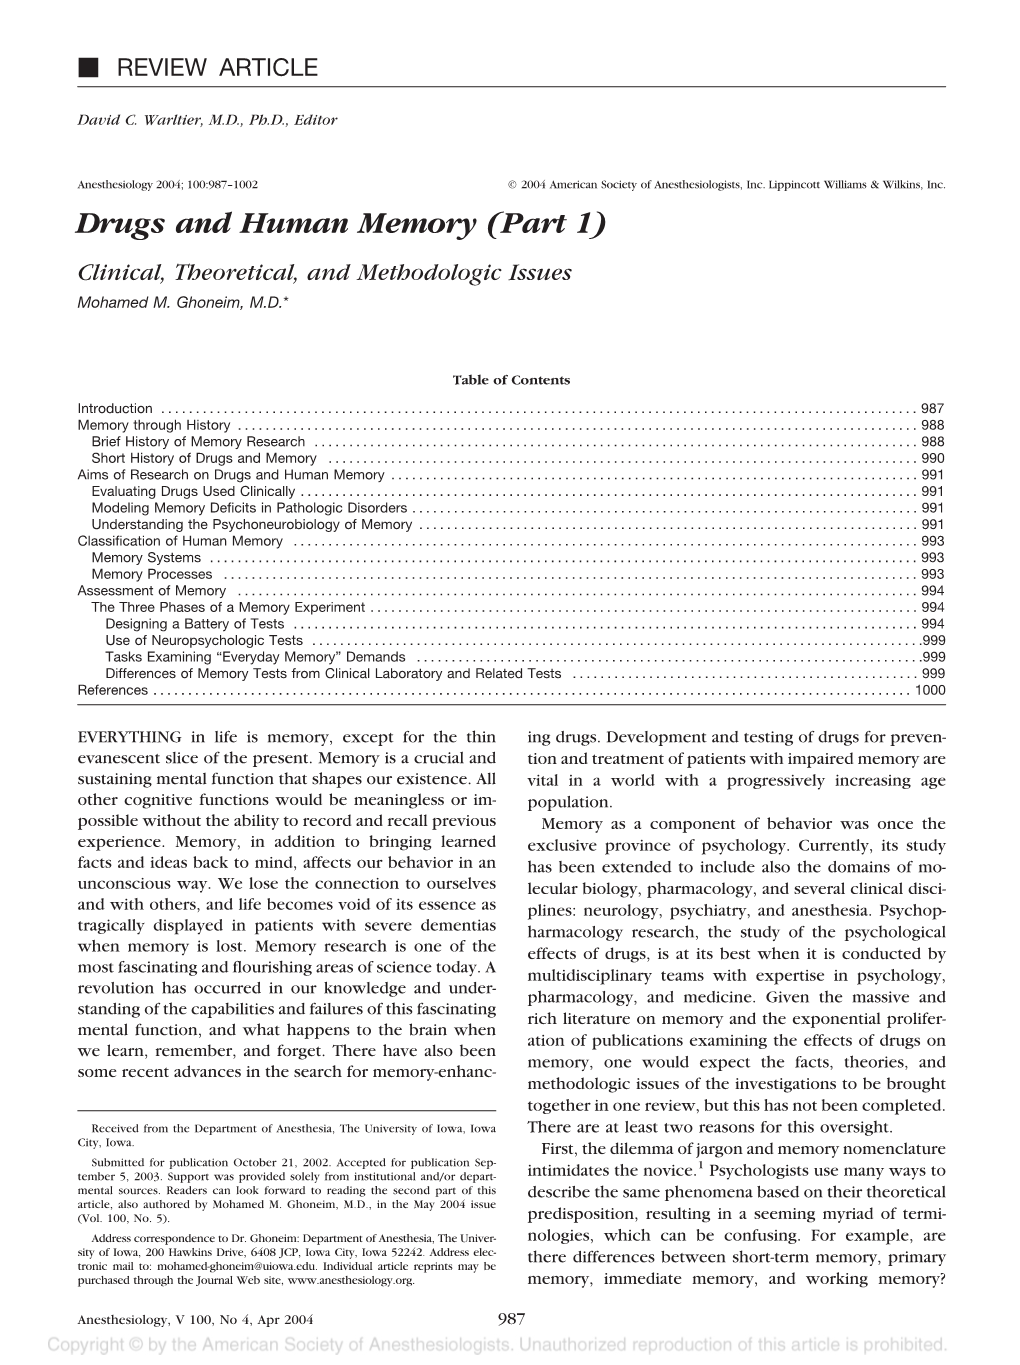 Drugs and Human Memory (Part 1) Clinical, Theoretical, and Methodologic Issues Mohamed M